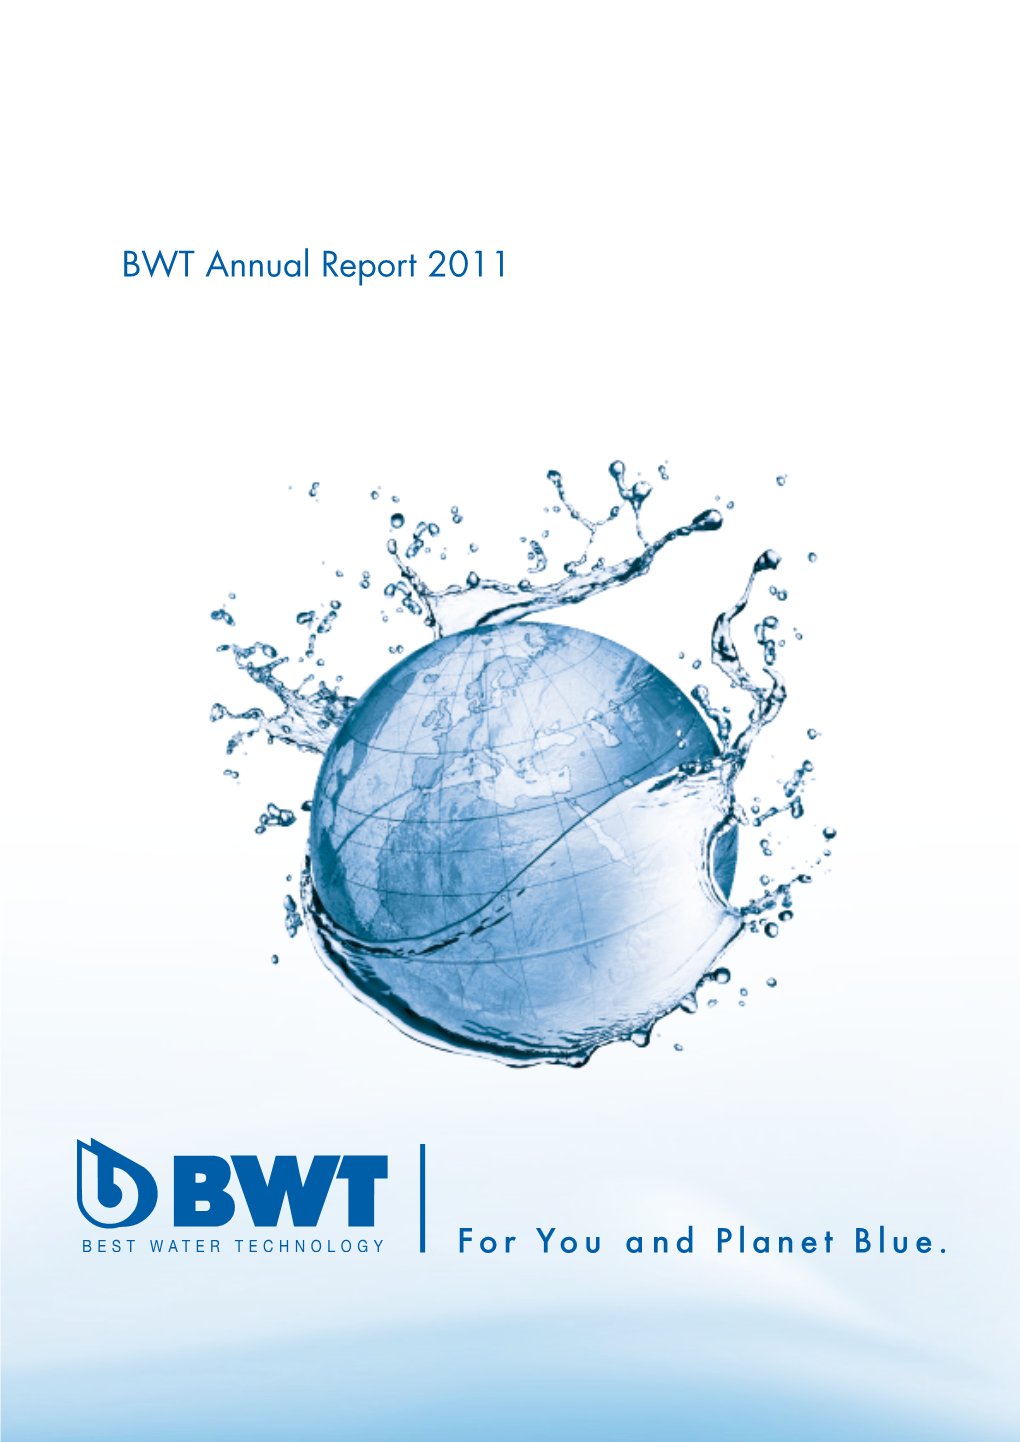 BWT Annual Report 2011 Just As You Have to Understand Humans to Know Their Needs, You Have to Understand Water to Design It